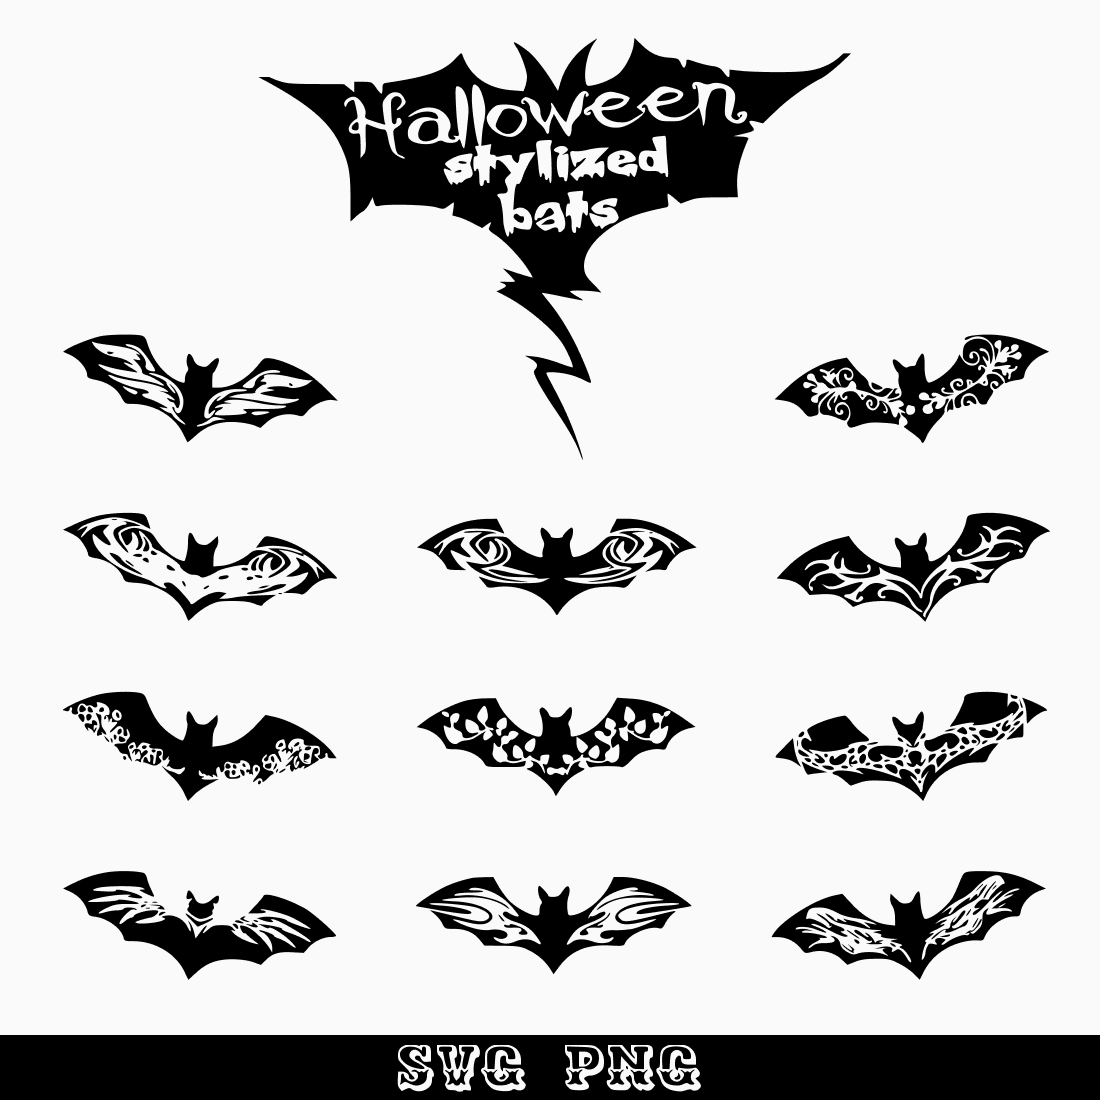 Bunch of bats that are on a white background.